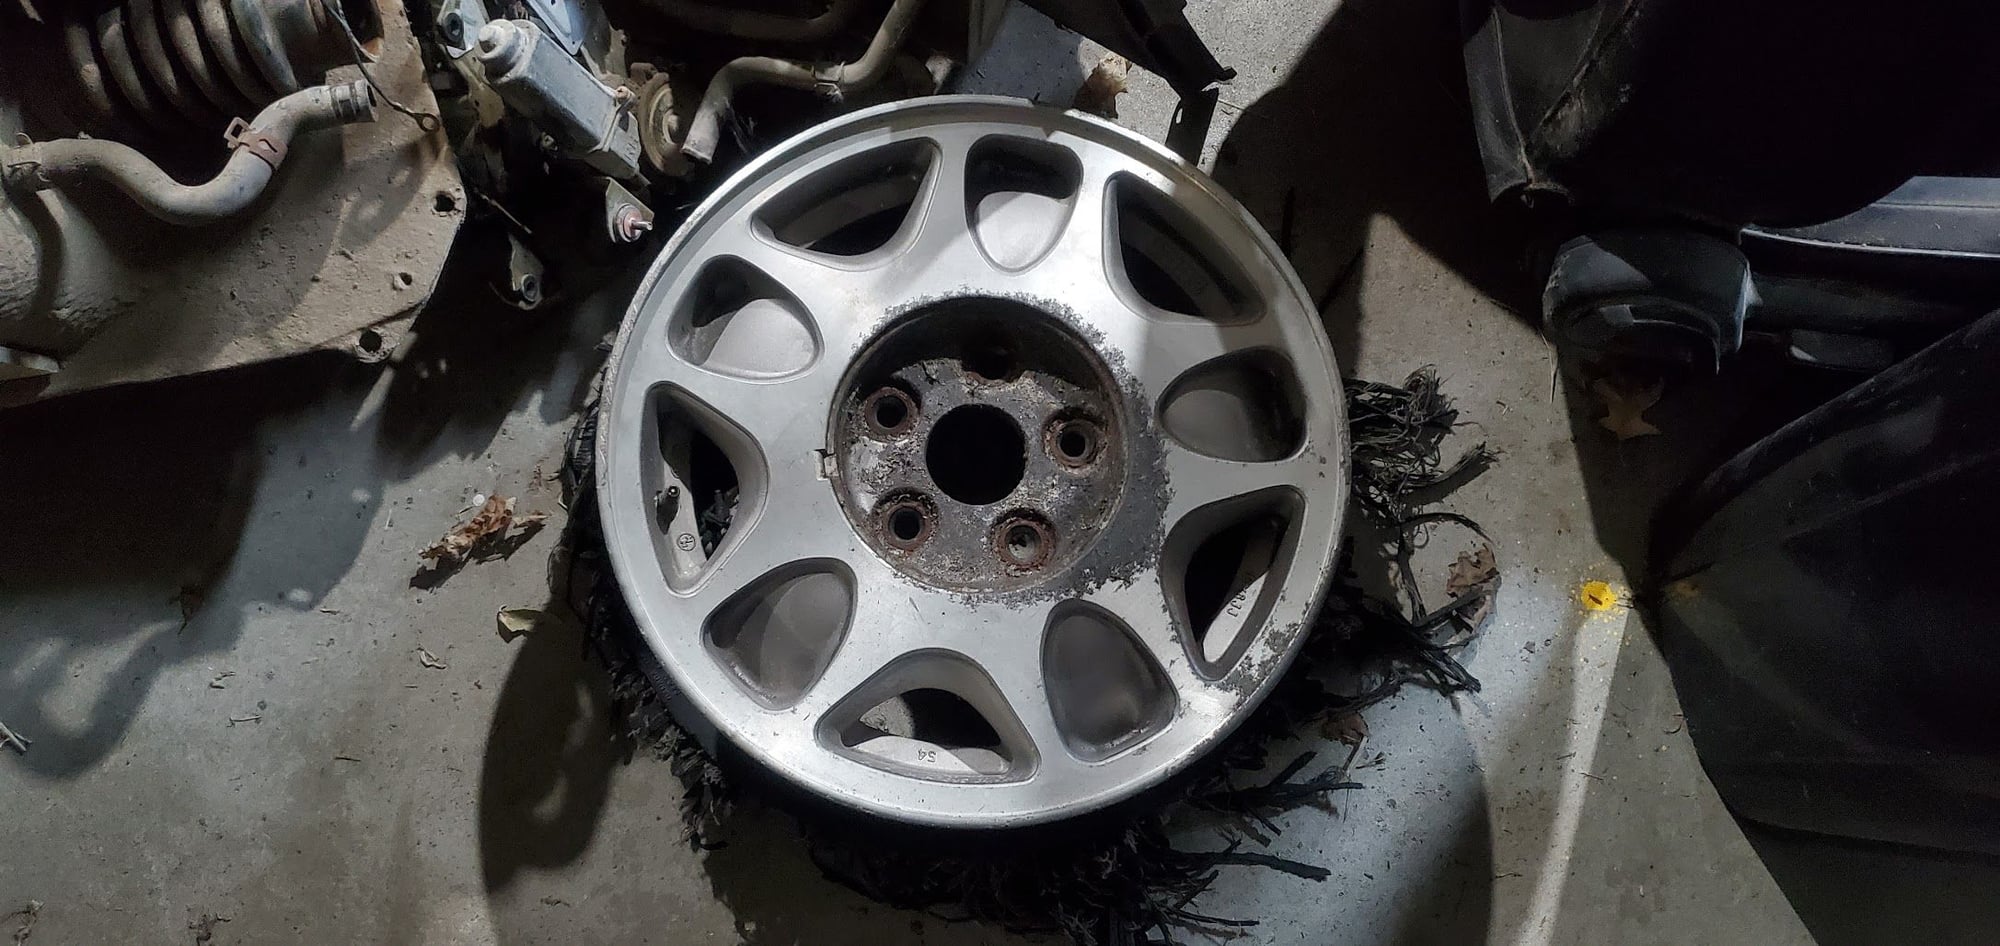 1989 Mazda RX-7 - Rims with center caps - Wheels and Tires/Axles - $800 - Wichita, KS 67220, United States